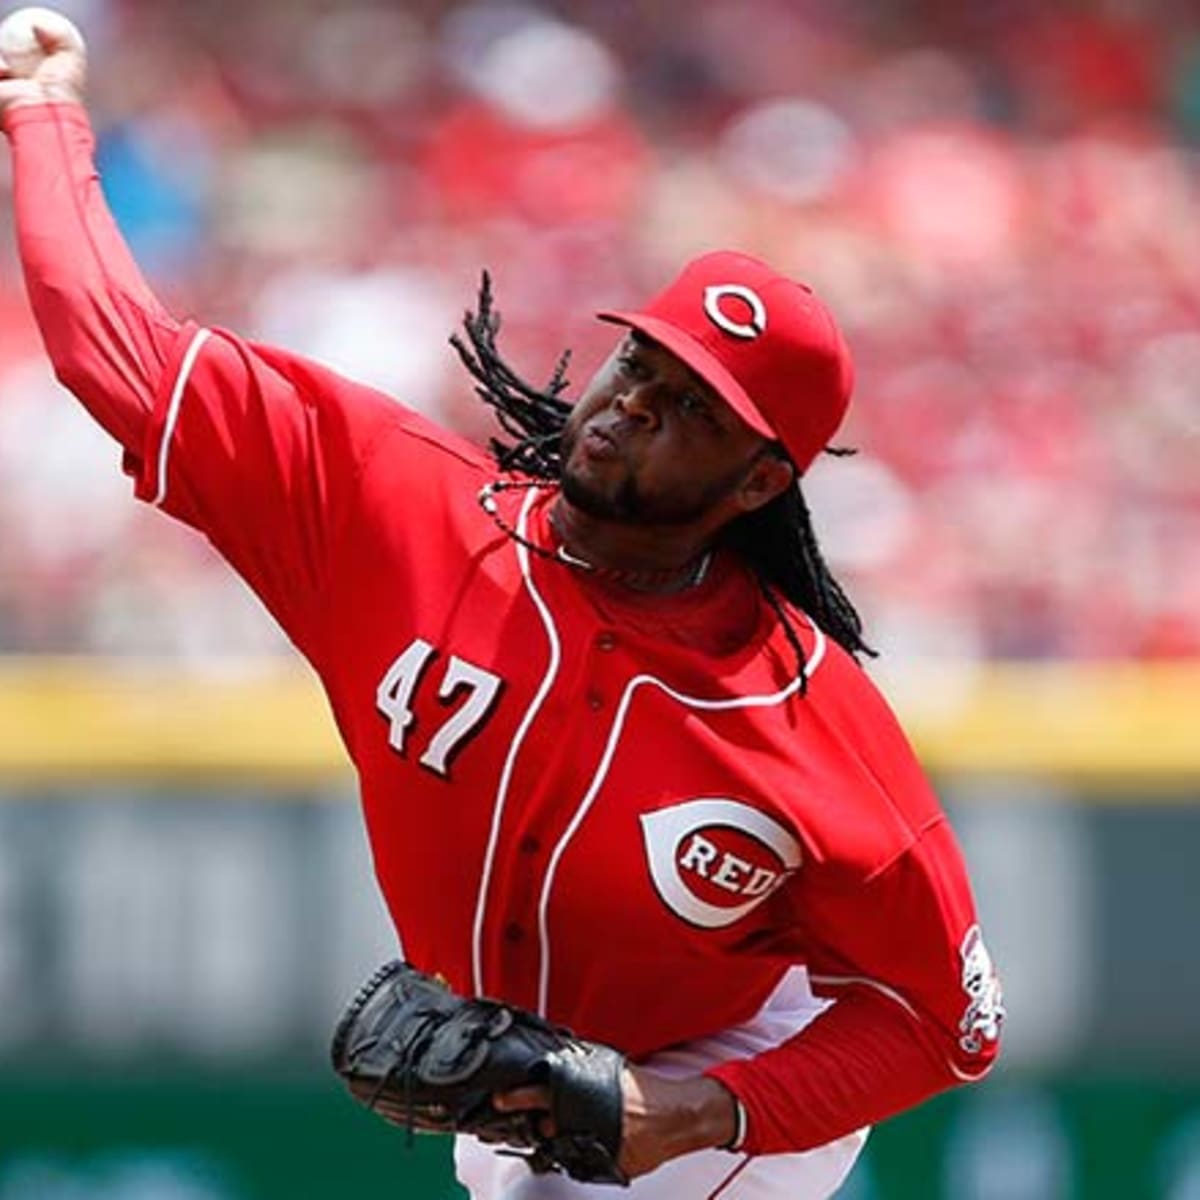 Reds fans left to long for another Johnny Cueto